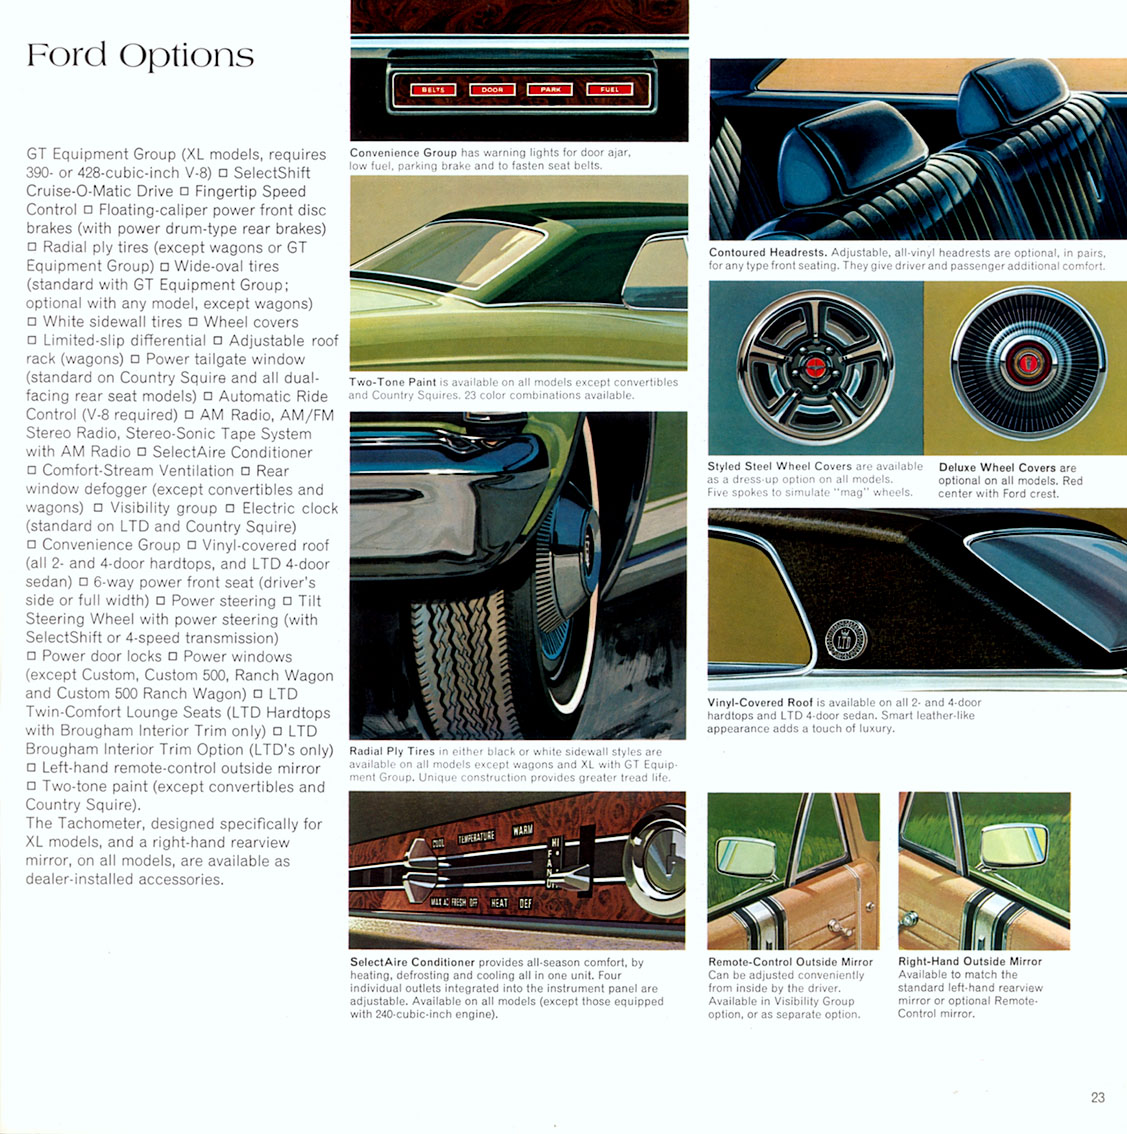 1968_Ford-23